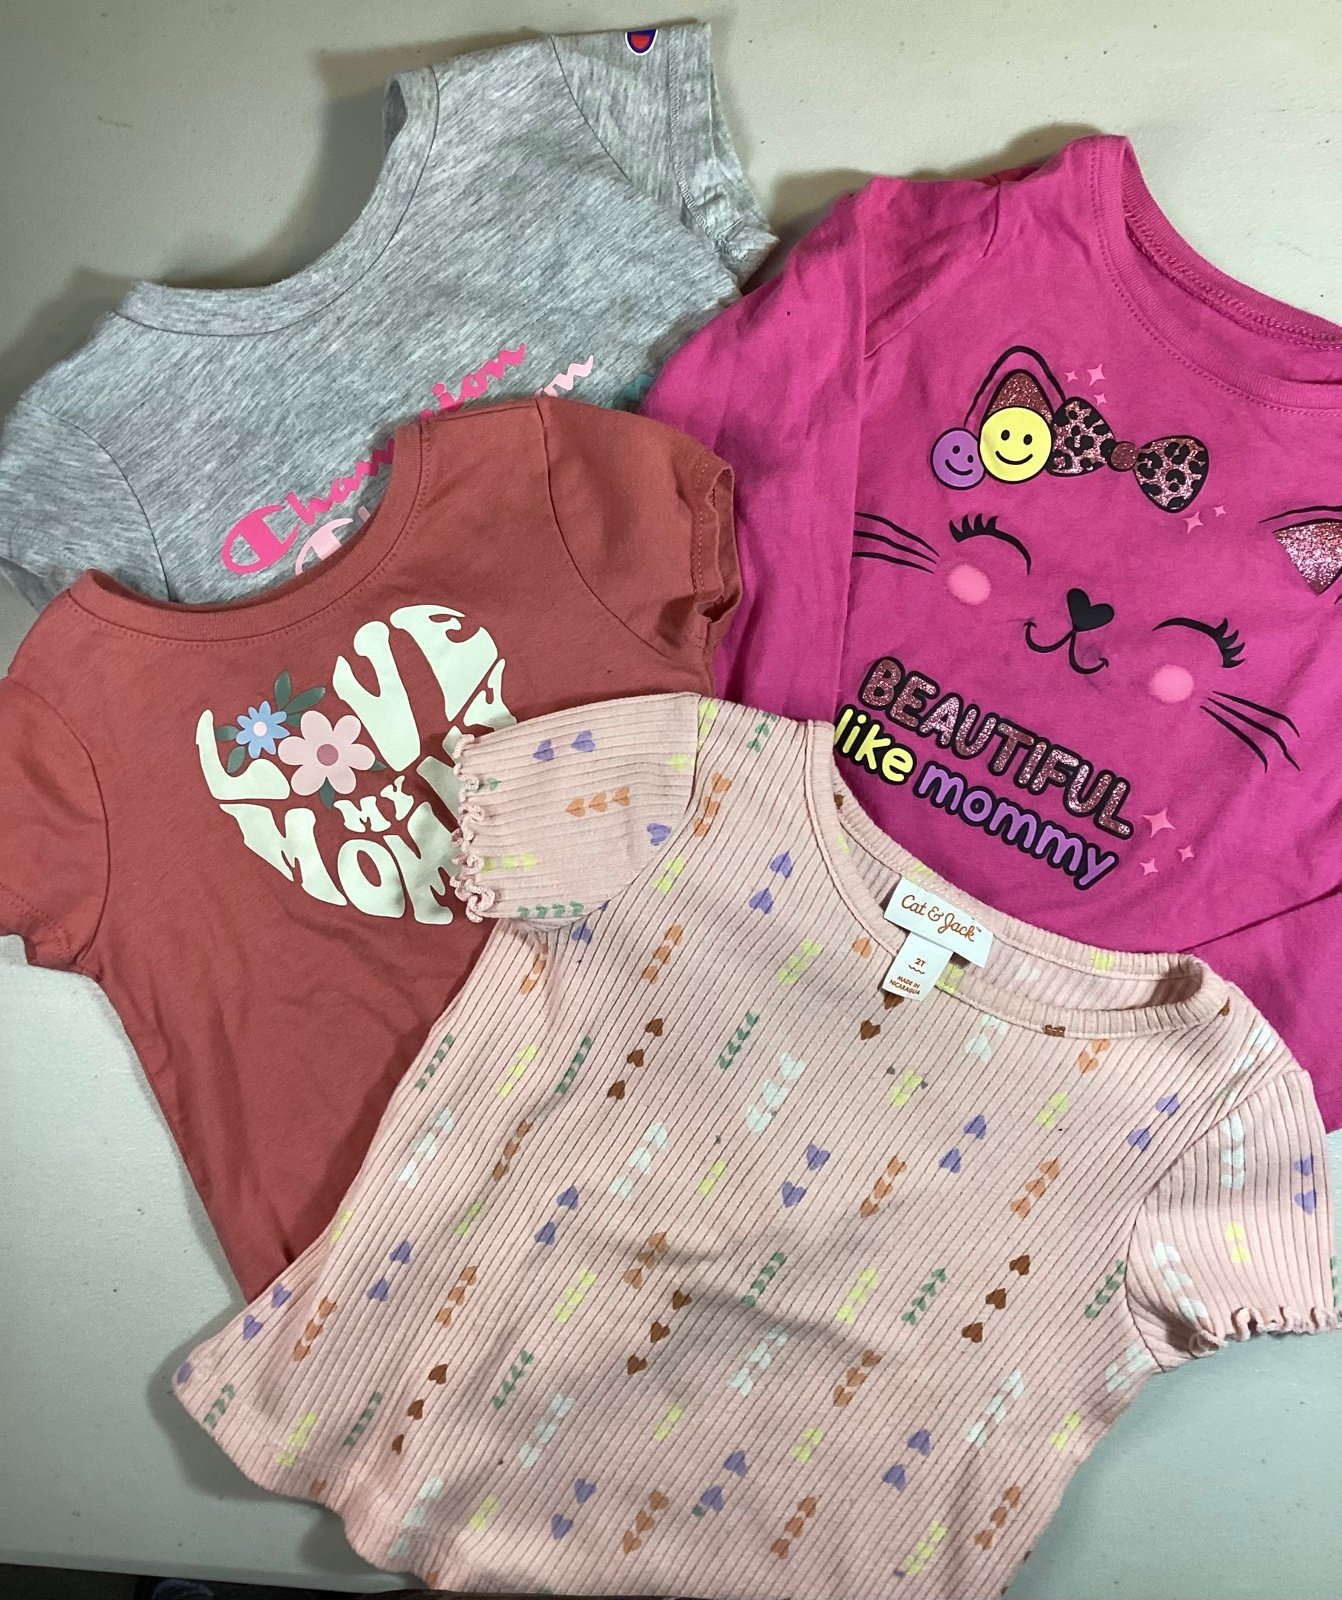 Lot of 4 Girls Toddler Shirts Clothes - Size 2T - USED Pav0PuYWi